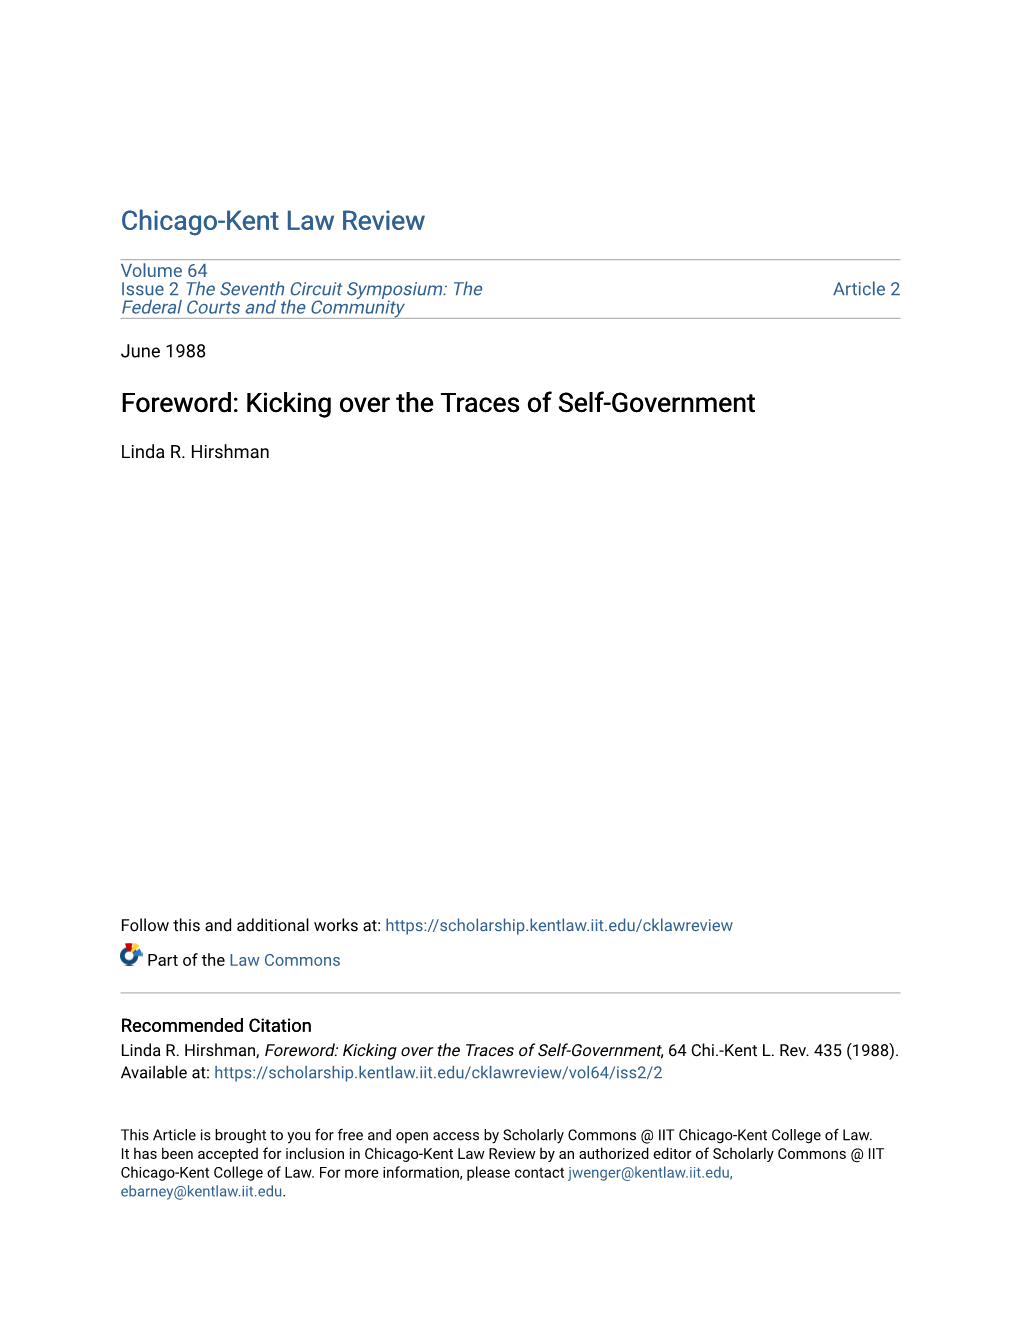 Foreword: Kicking Over the Traces of Self-Government